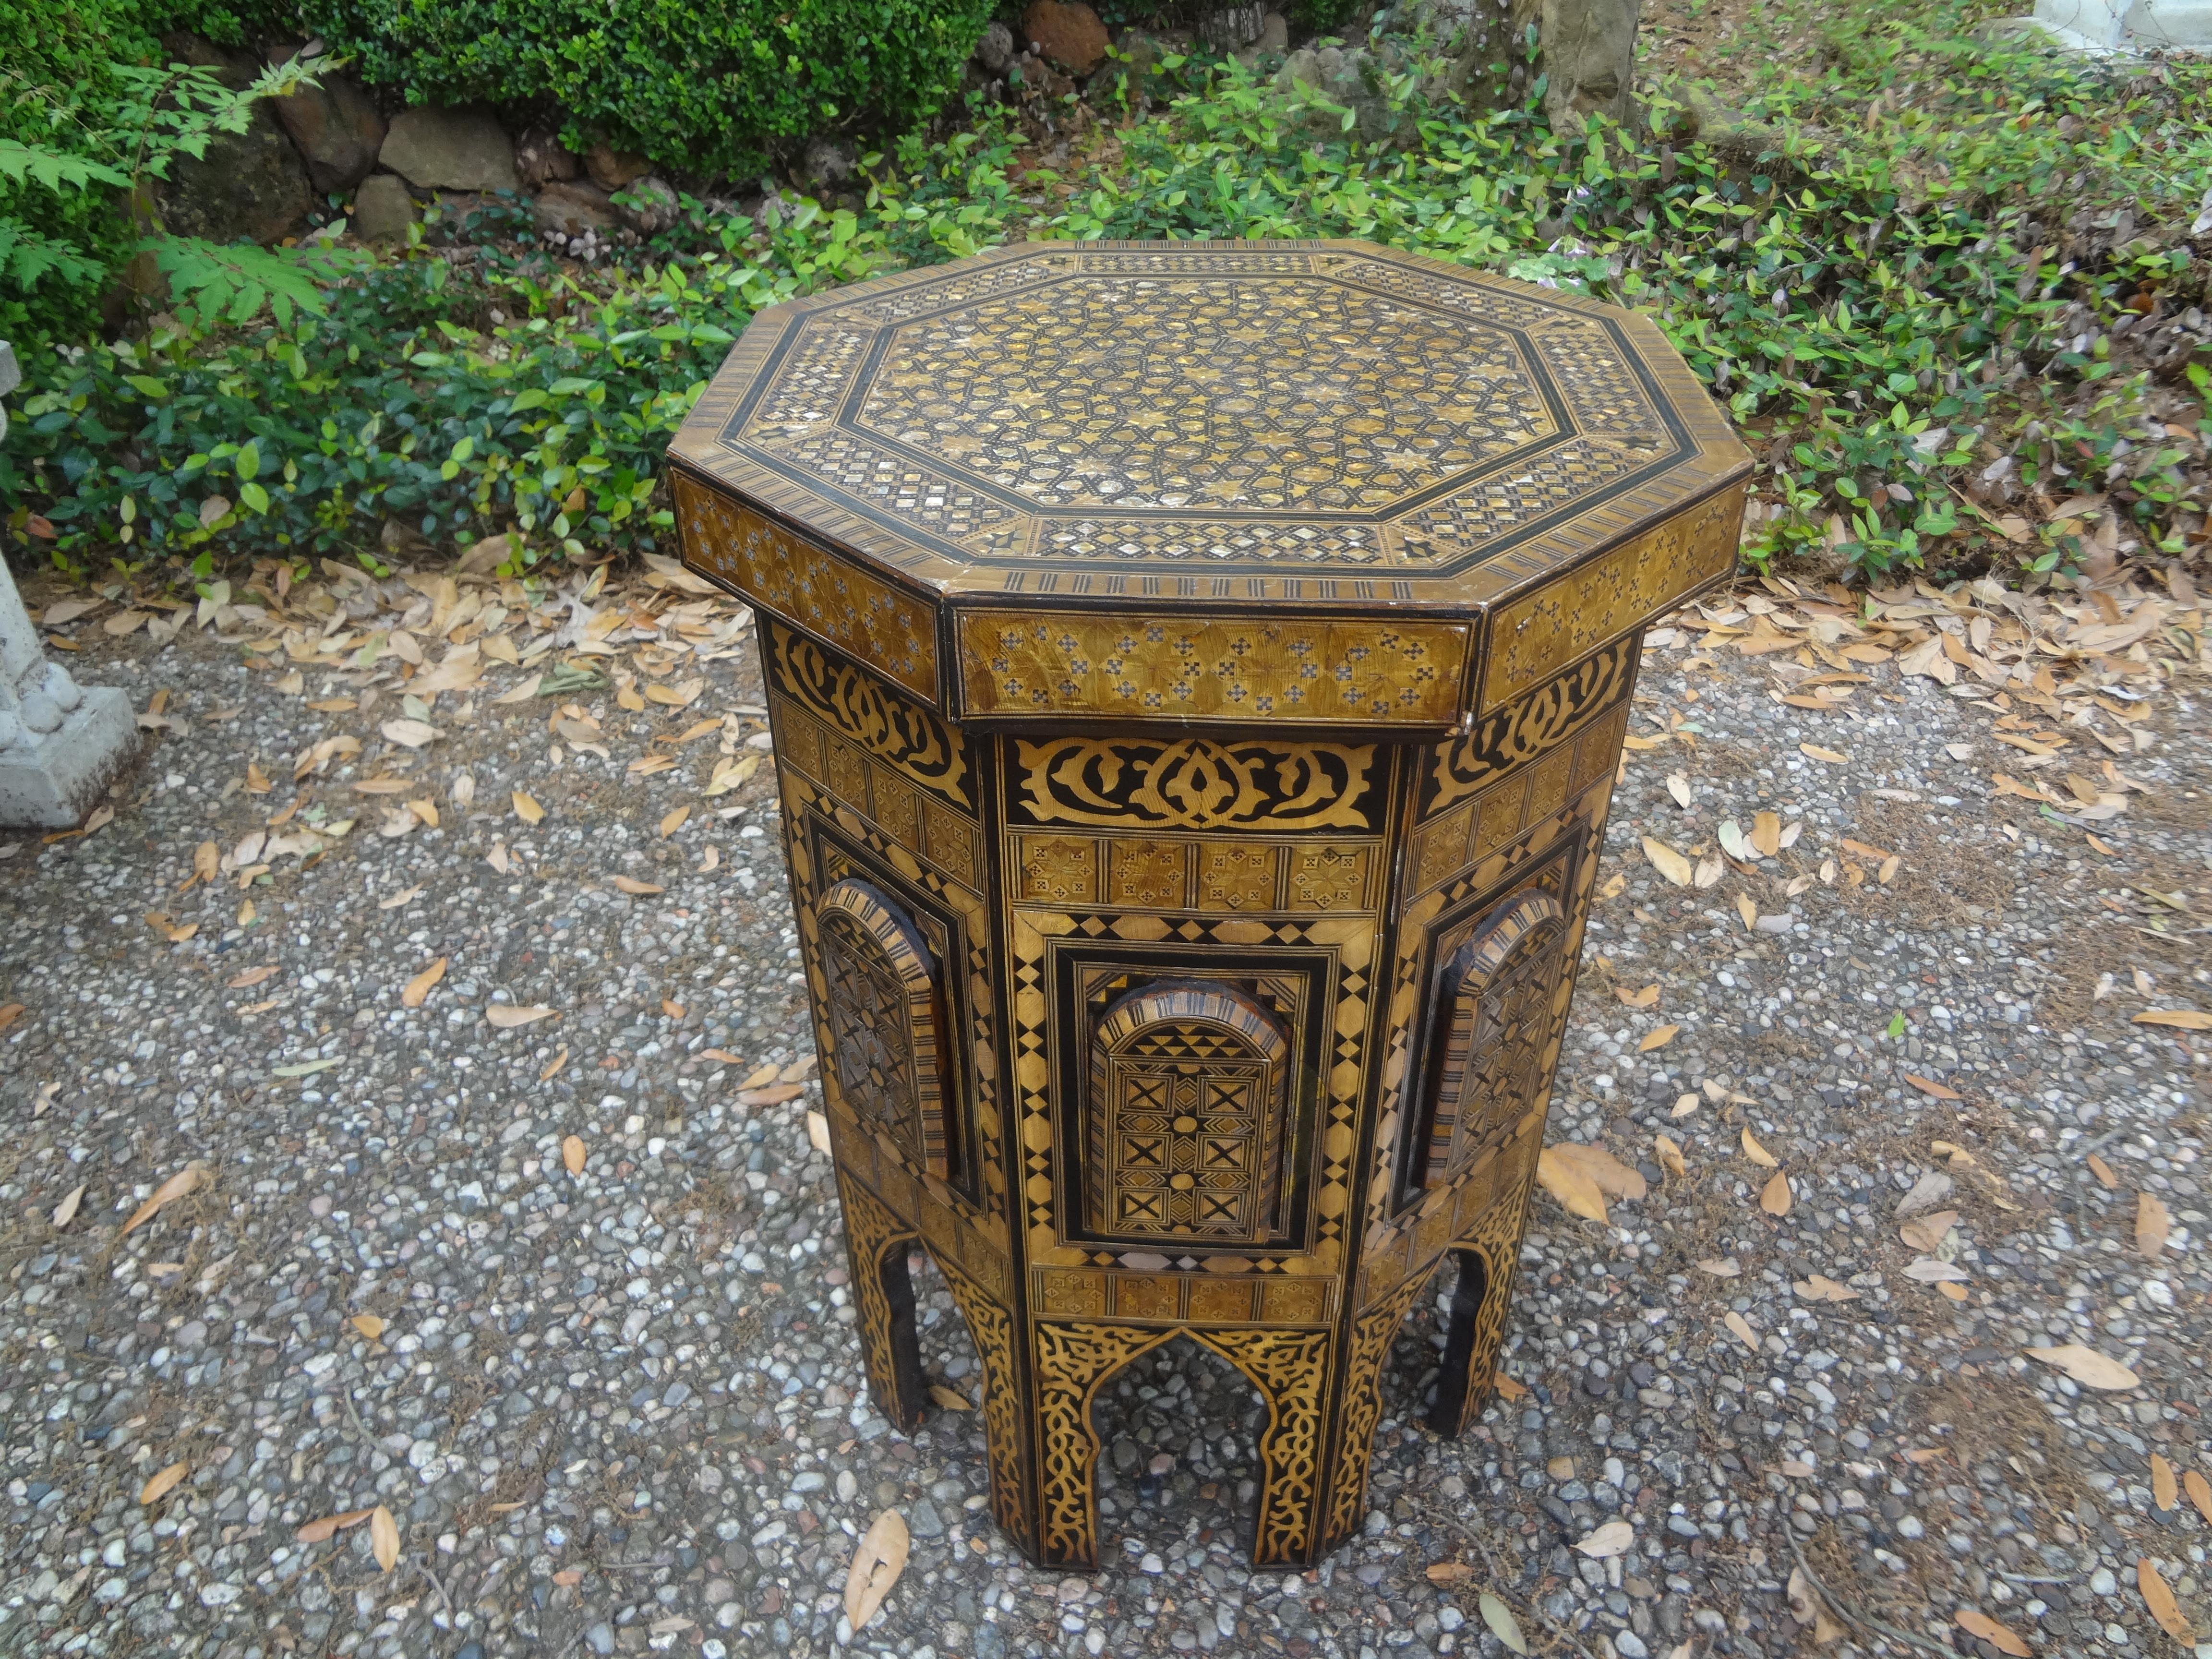 Pair Of Middle Eastern Moorish style tables. This pair of tables, side tables or drink tables are octagonal in shape and are inlaid with a variety of wood and mother of pearl. Our versatile Arabesque style tables are either Moroccan or Syrian in